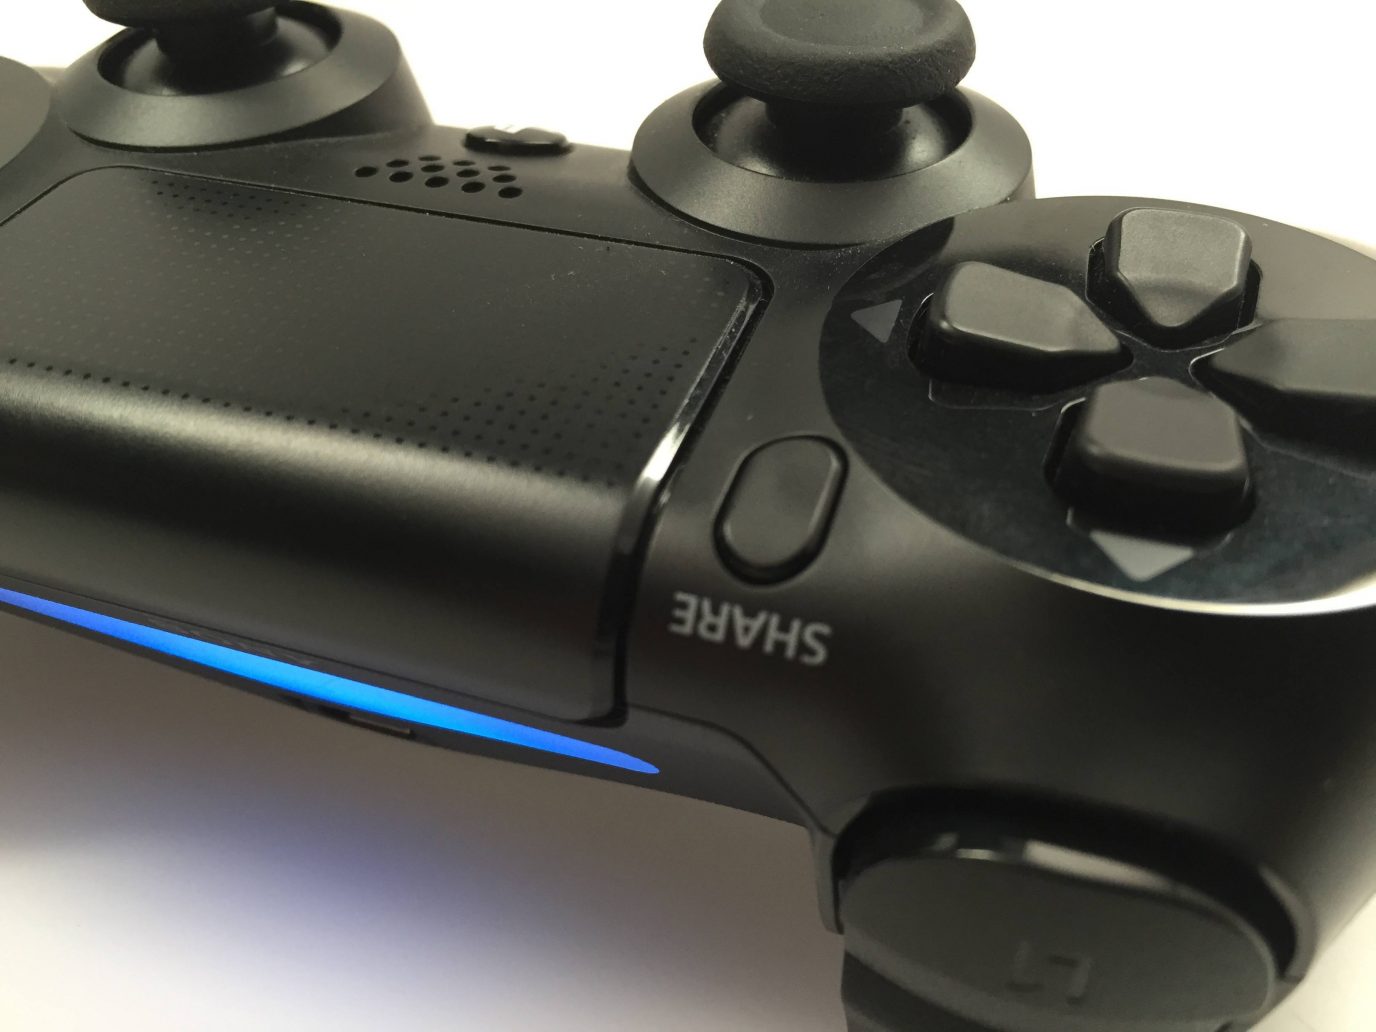 how to use ps4 controller with sixtyforce emulator on mac